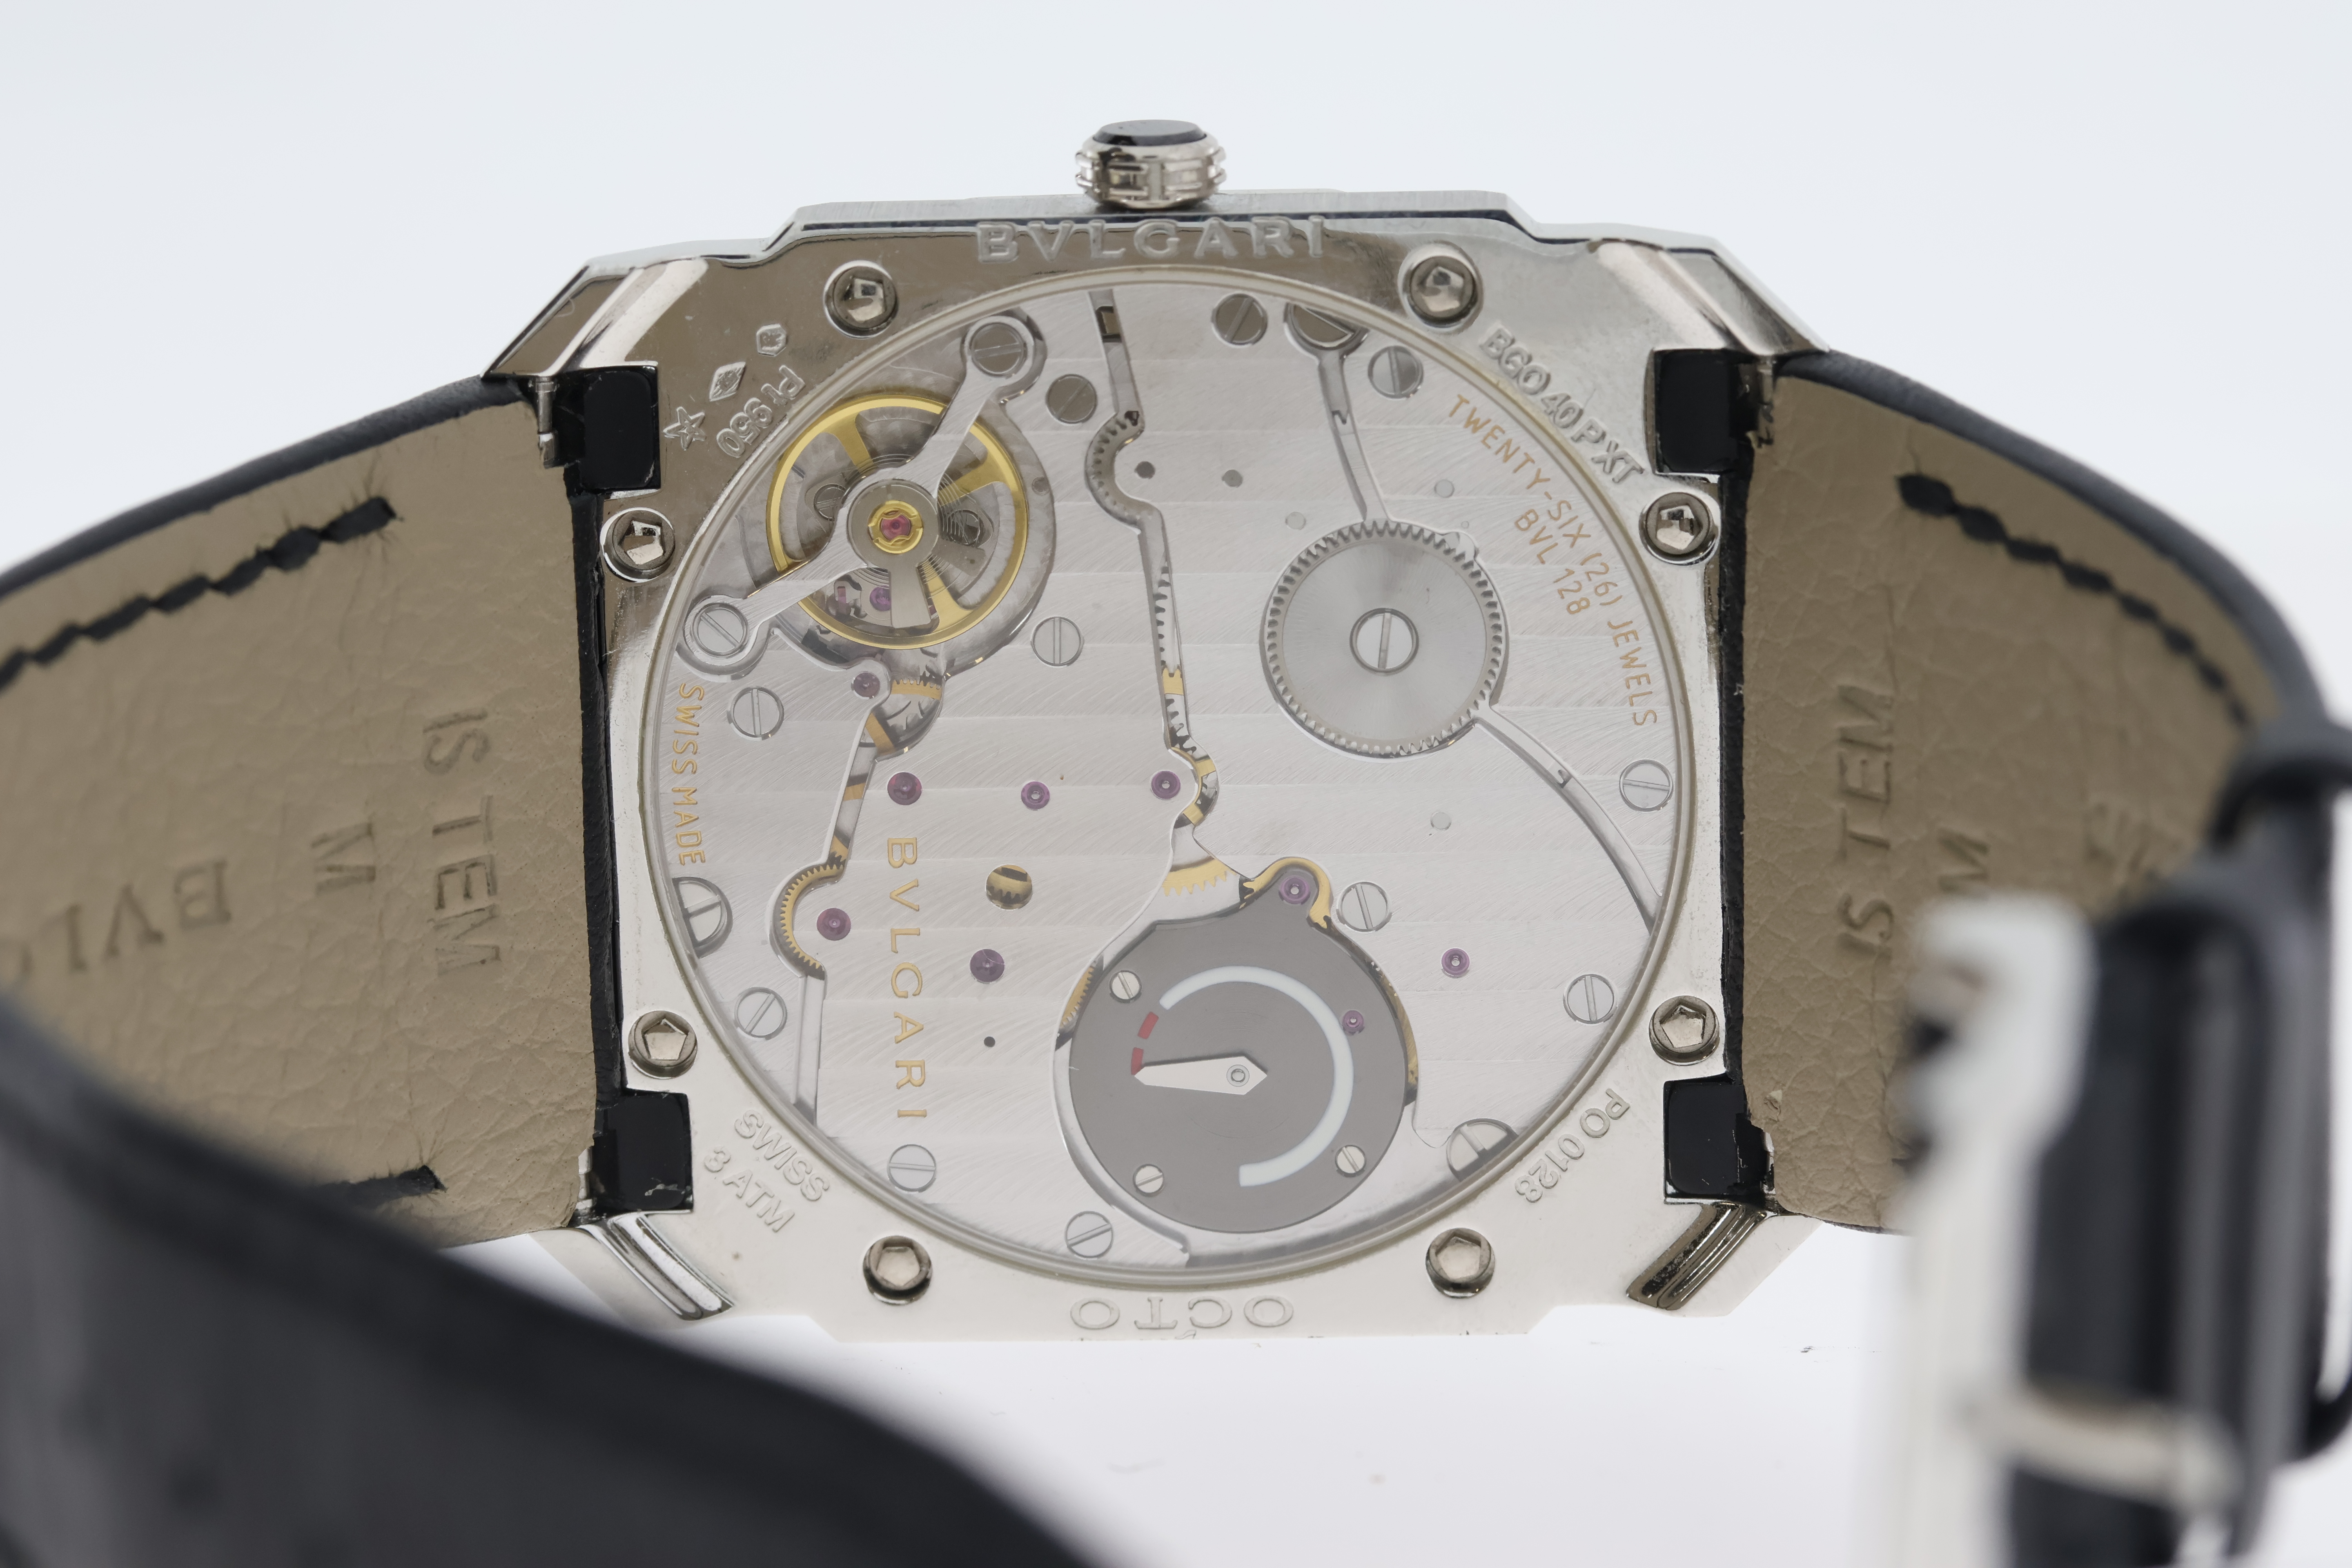 Bulgari Octo Finissimo Ultra Thin Platinum 102028 Manual Wind with Box and Papers - Image 4 of 5